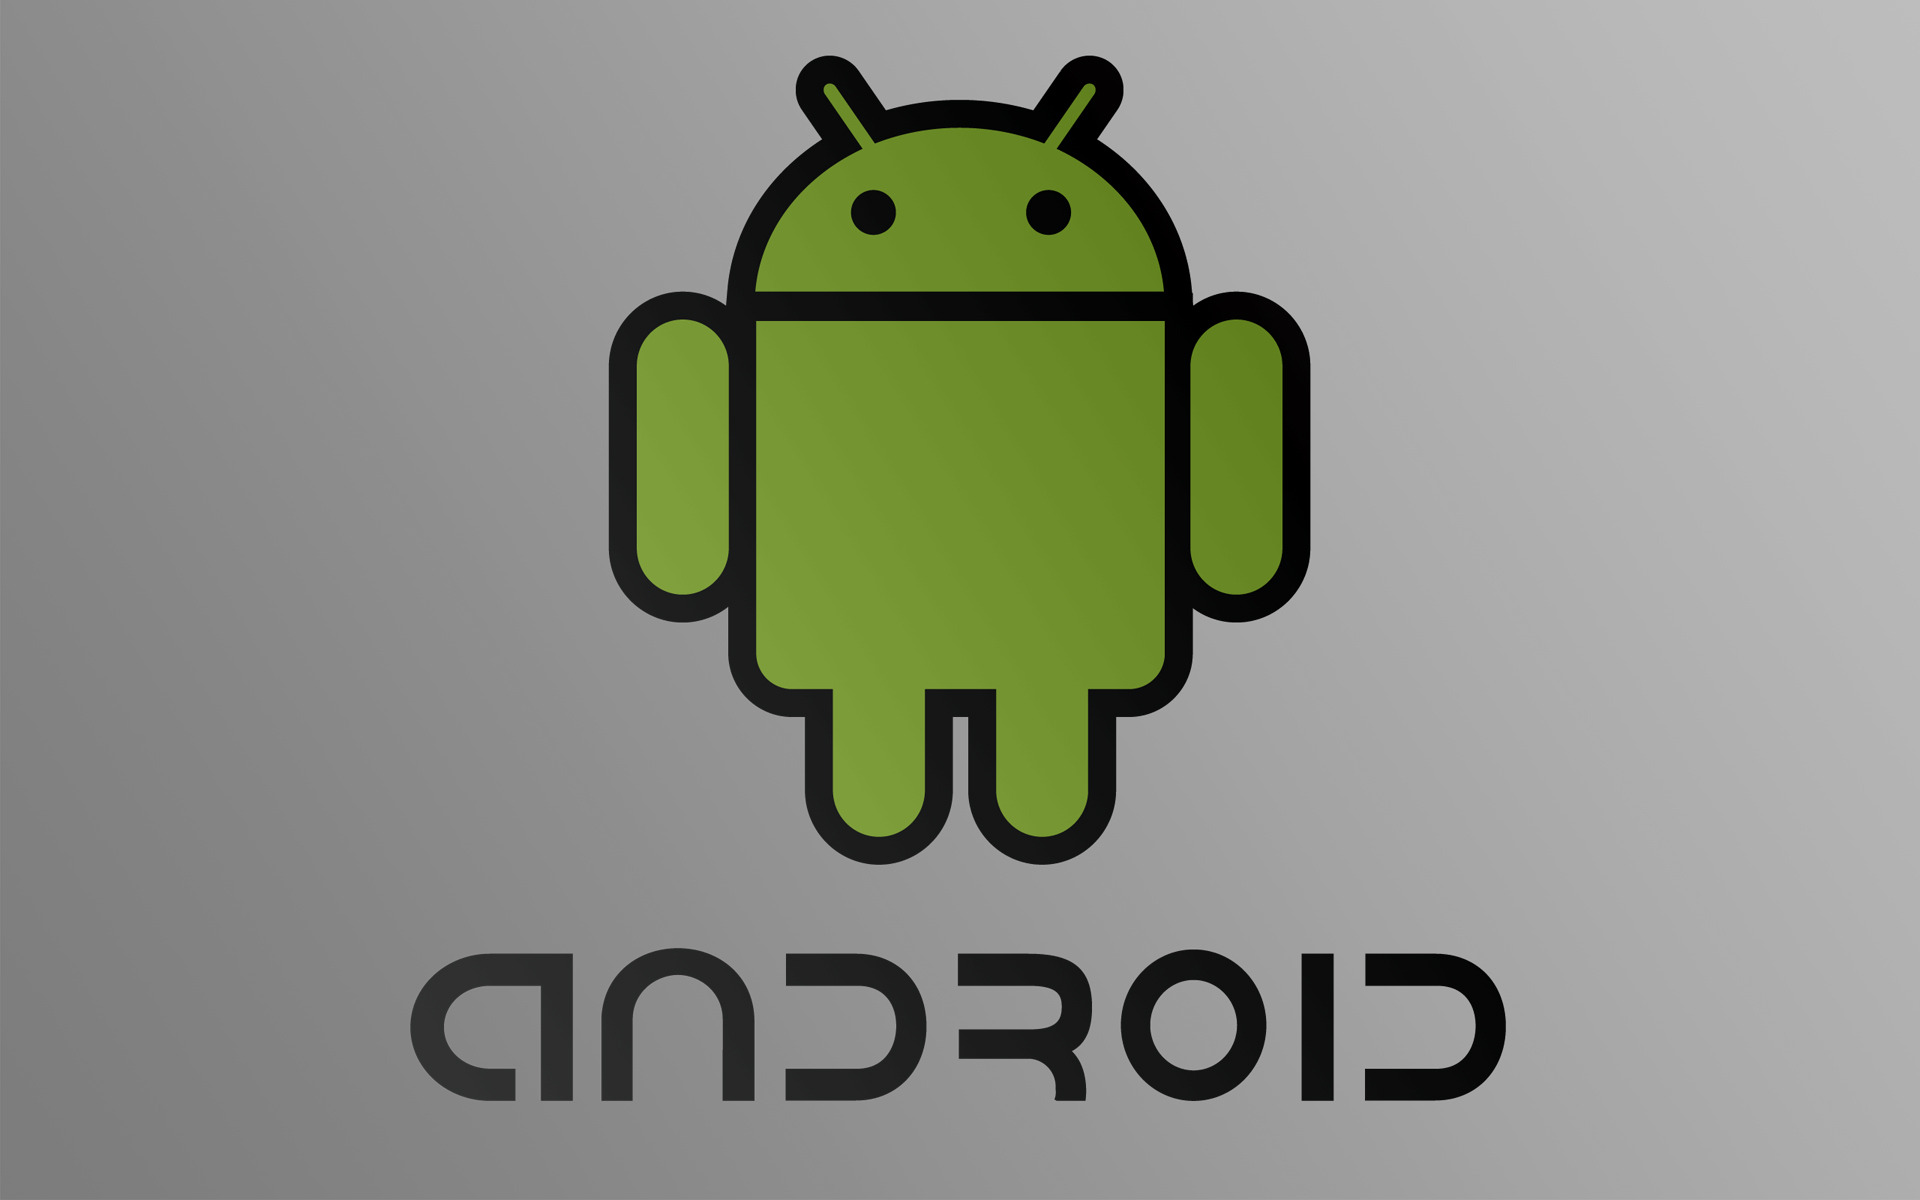 Leave a comment on: "Android in Reality". 